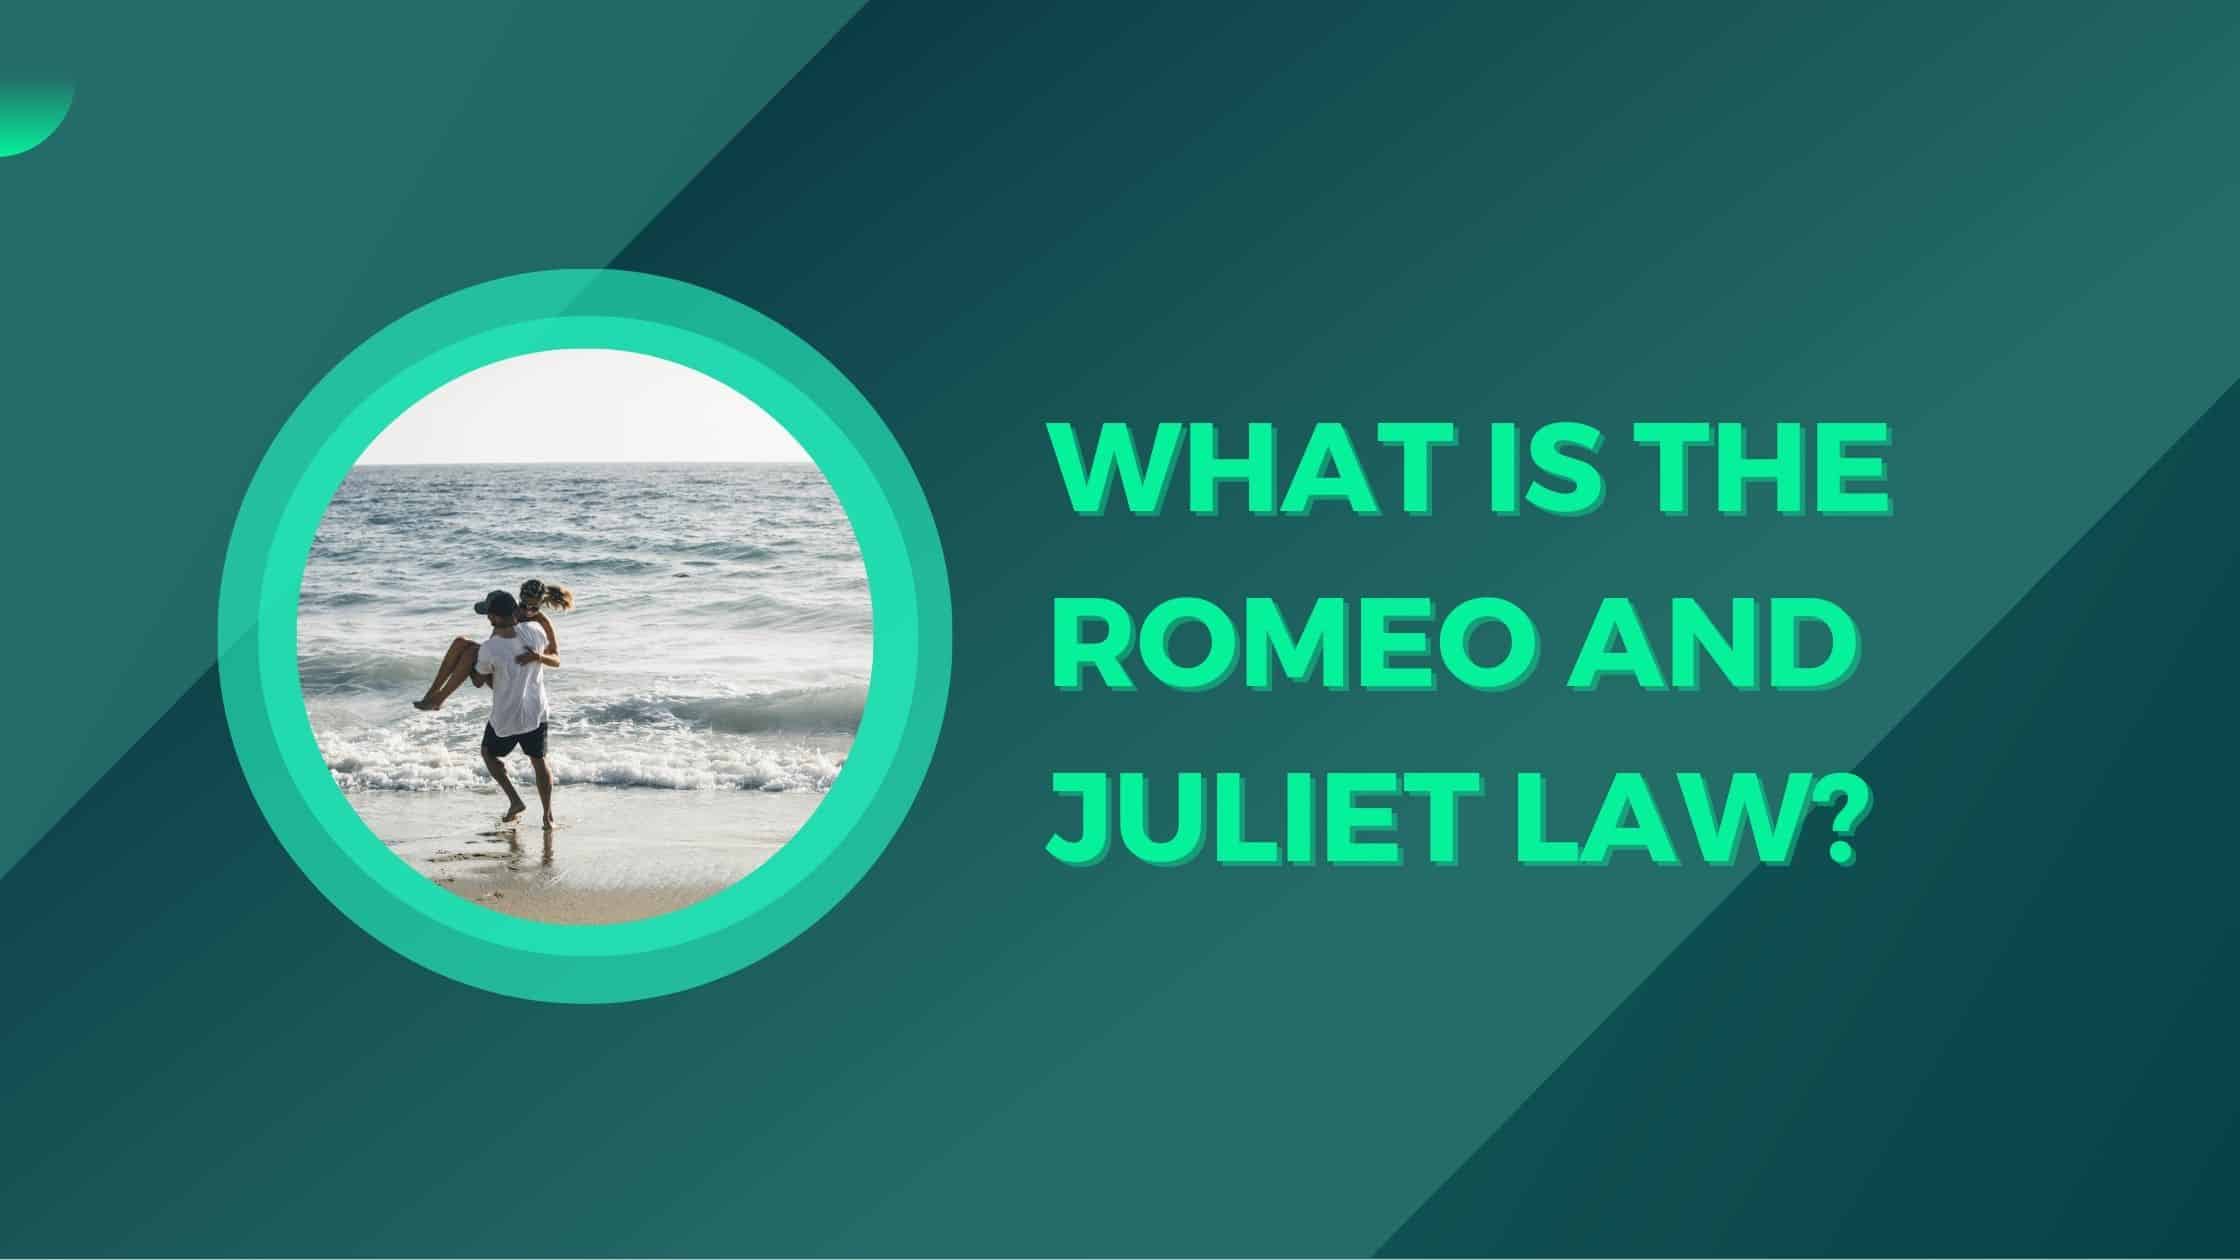 romeo and juliet law